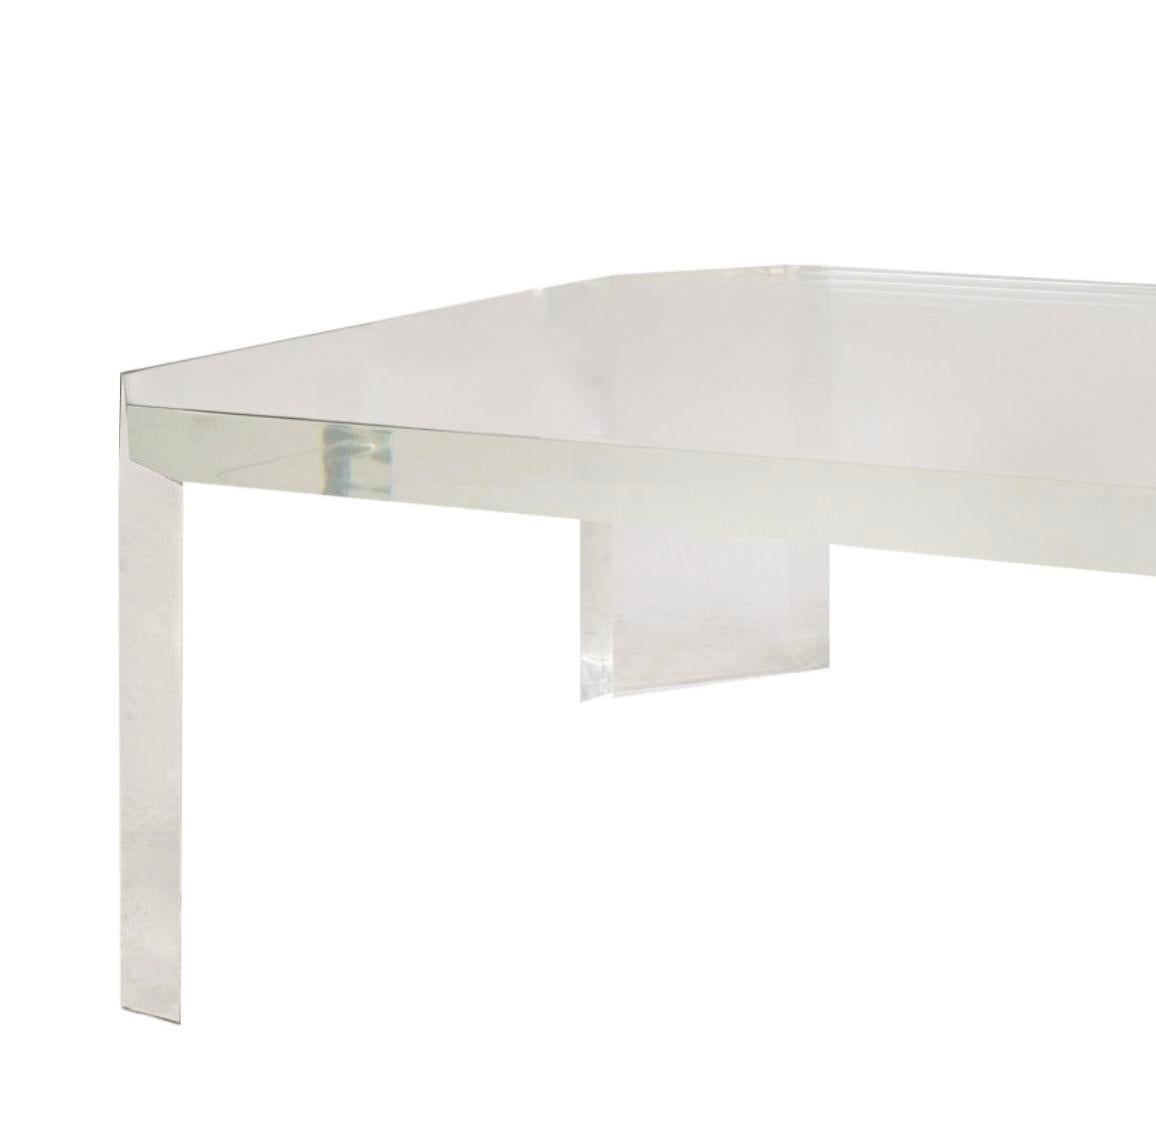 Stunning rectangular lucite coffee table with canted corners by Charles Hollis Jones. In great condition.
Dimensions:
17